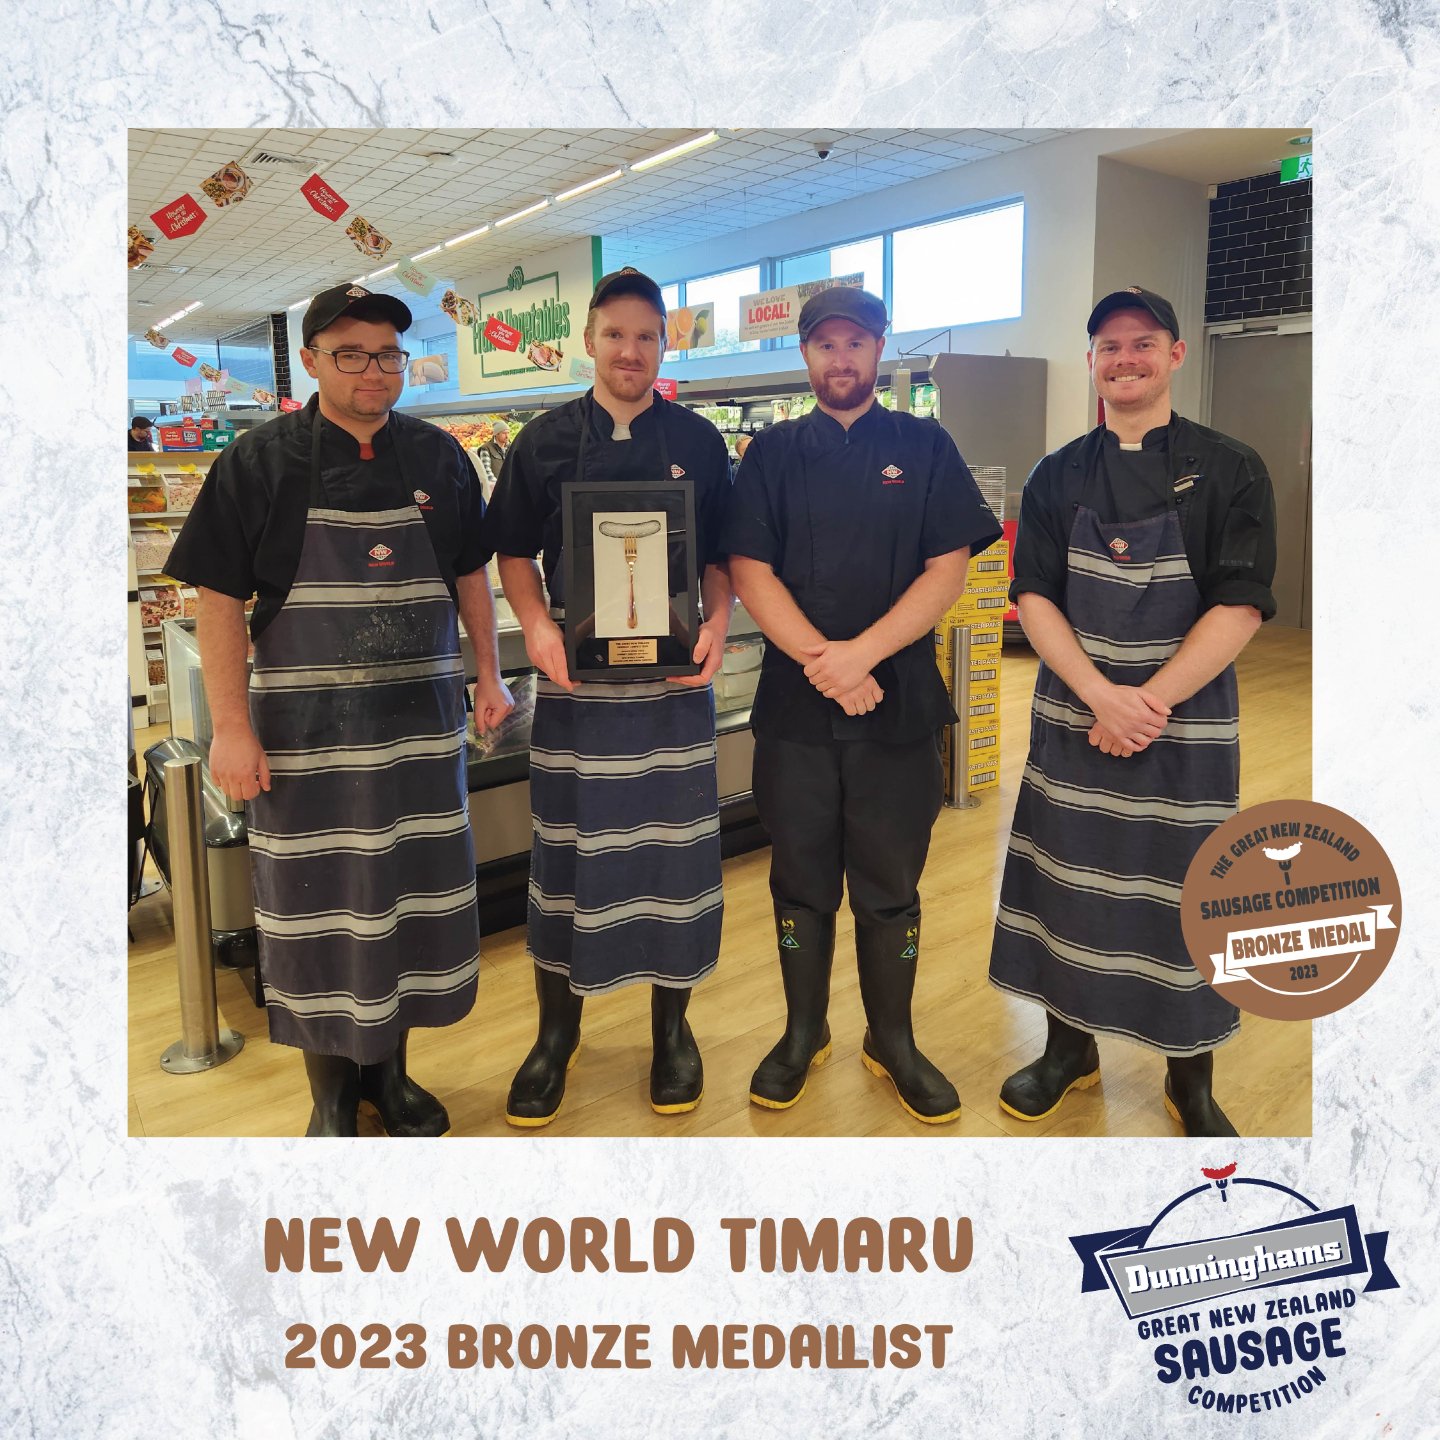 The team at New World Timaru have been busy since winning their Bronze medal for their Chicken, Leek and Bacon Sausages at last year&rsquo;s competition. Imagine quadrupling the number of snags you had to make weekly. What a fantastic result for the 